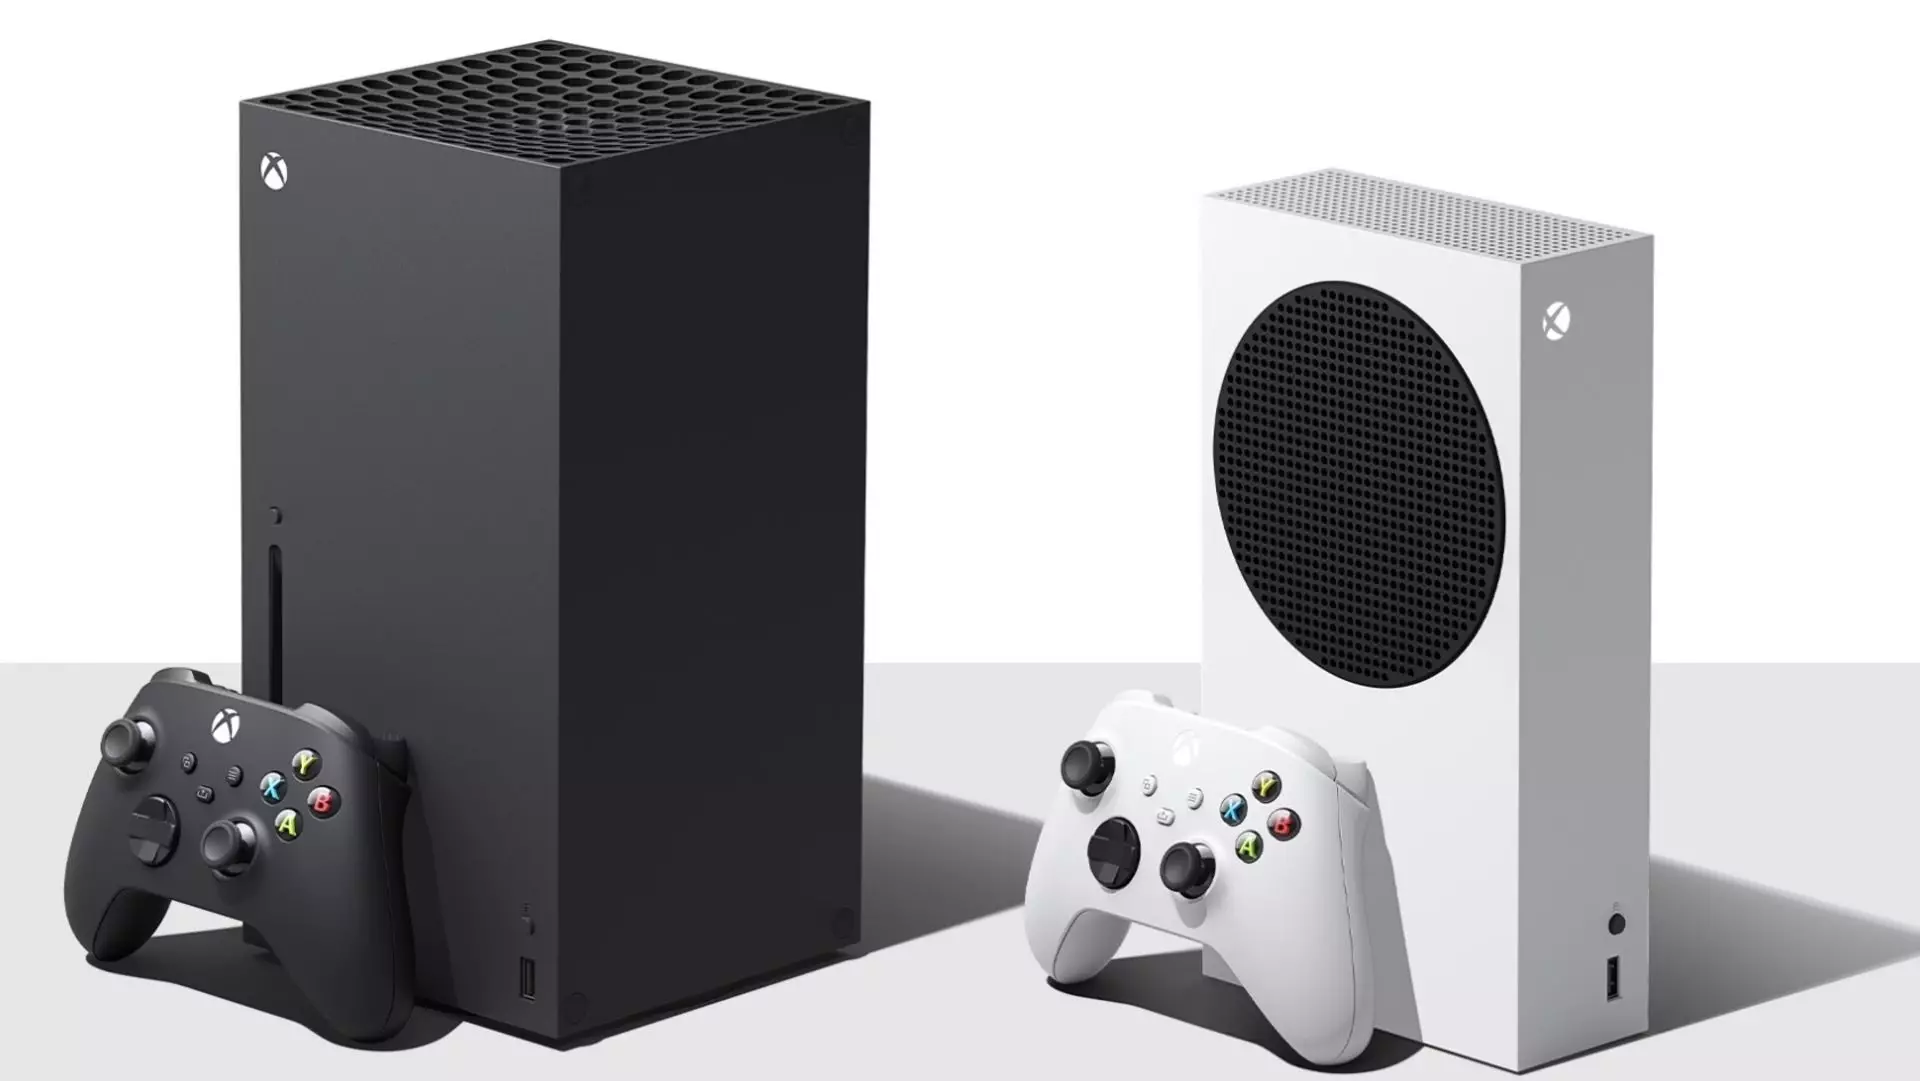 The Xbox Series X and Series S /